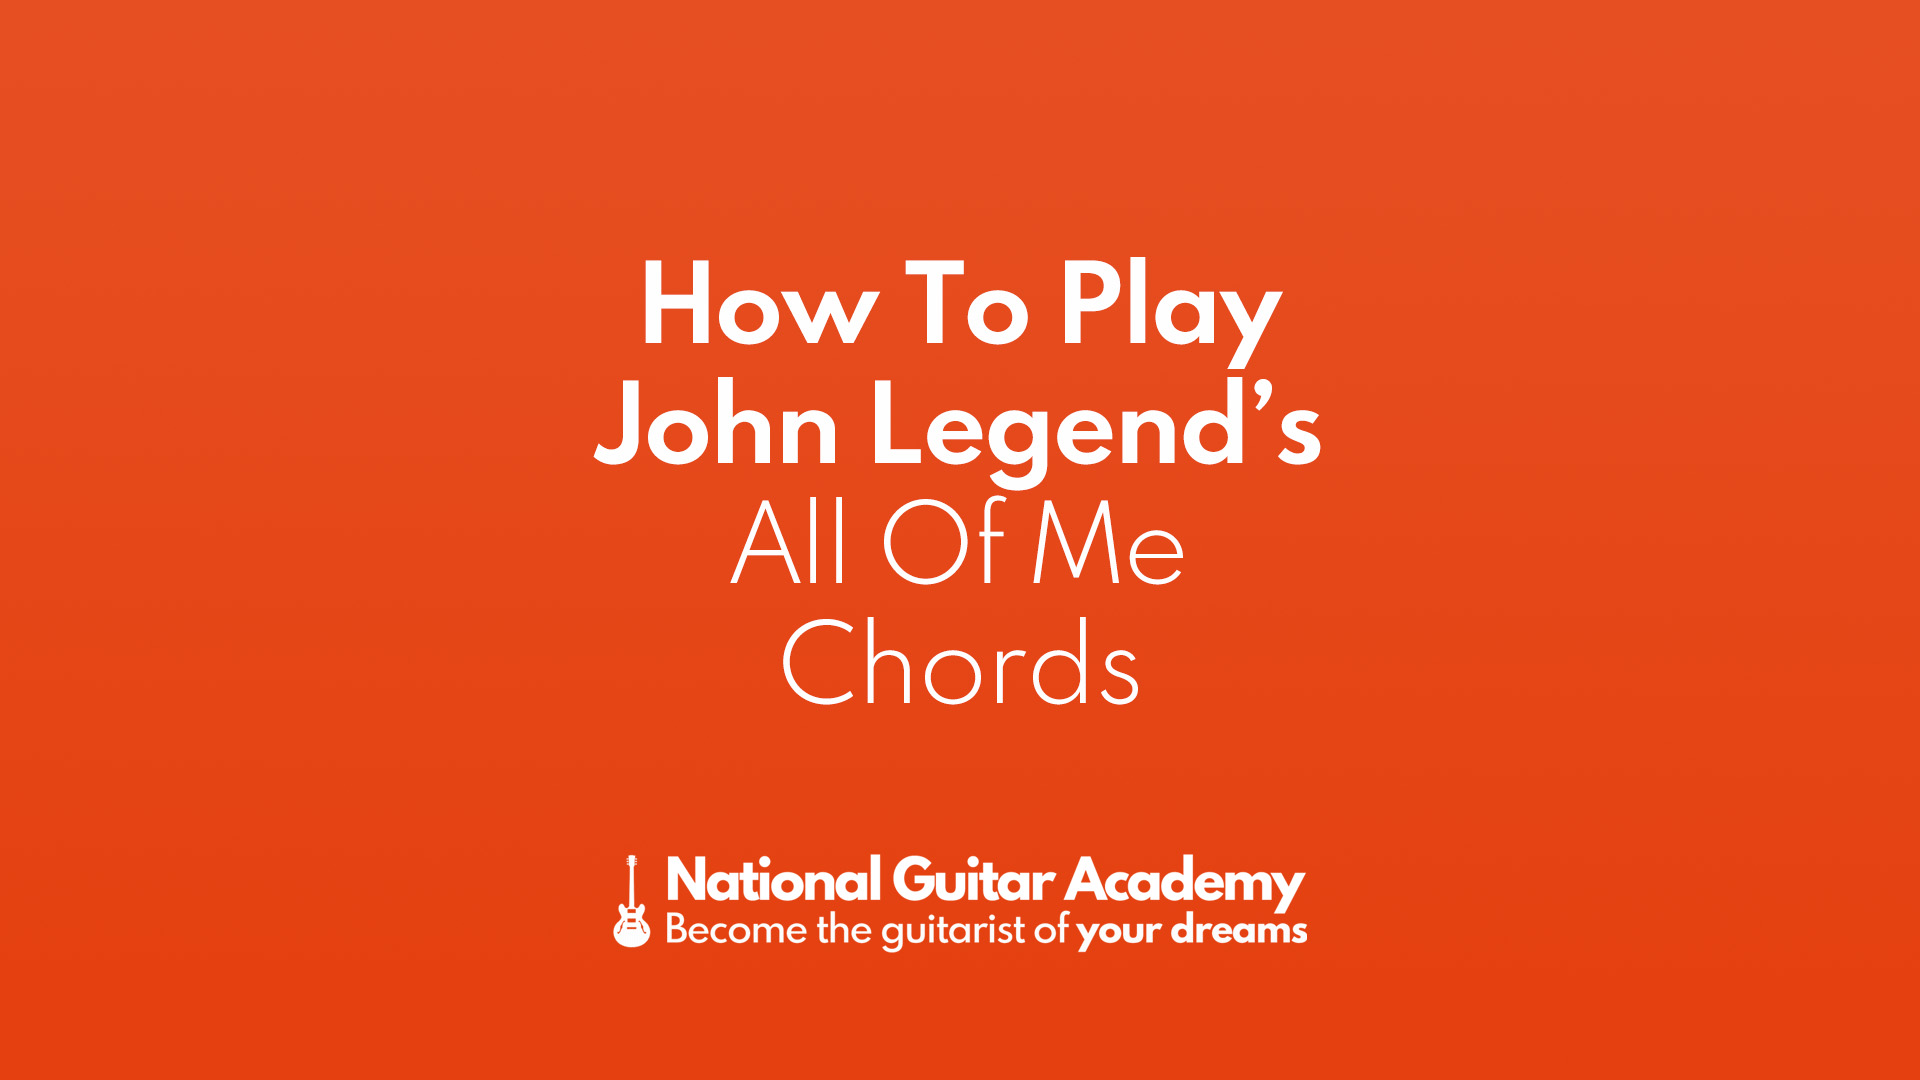 How To Play John Legend's All Of - National Guitar Academy